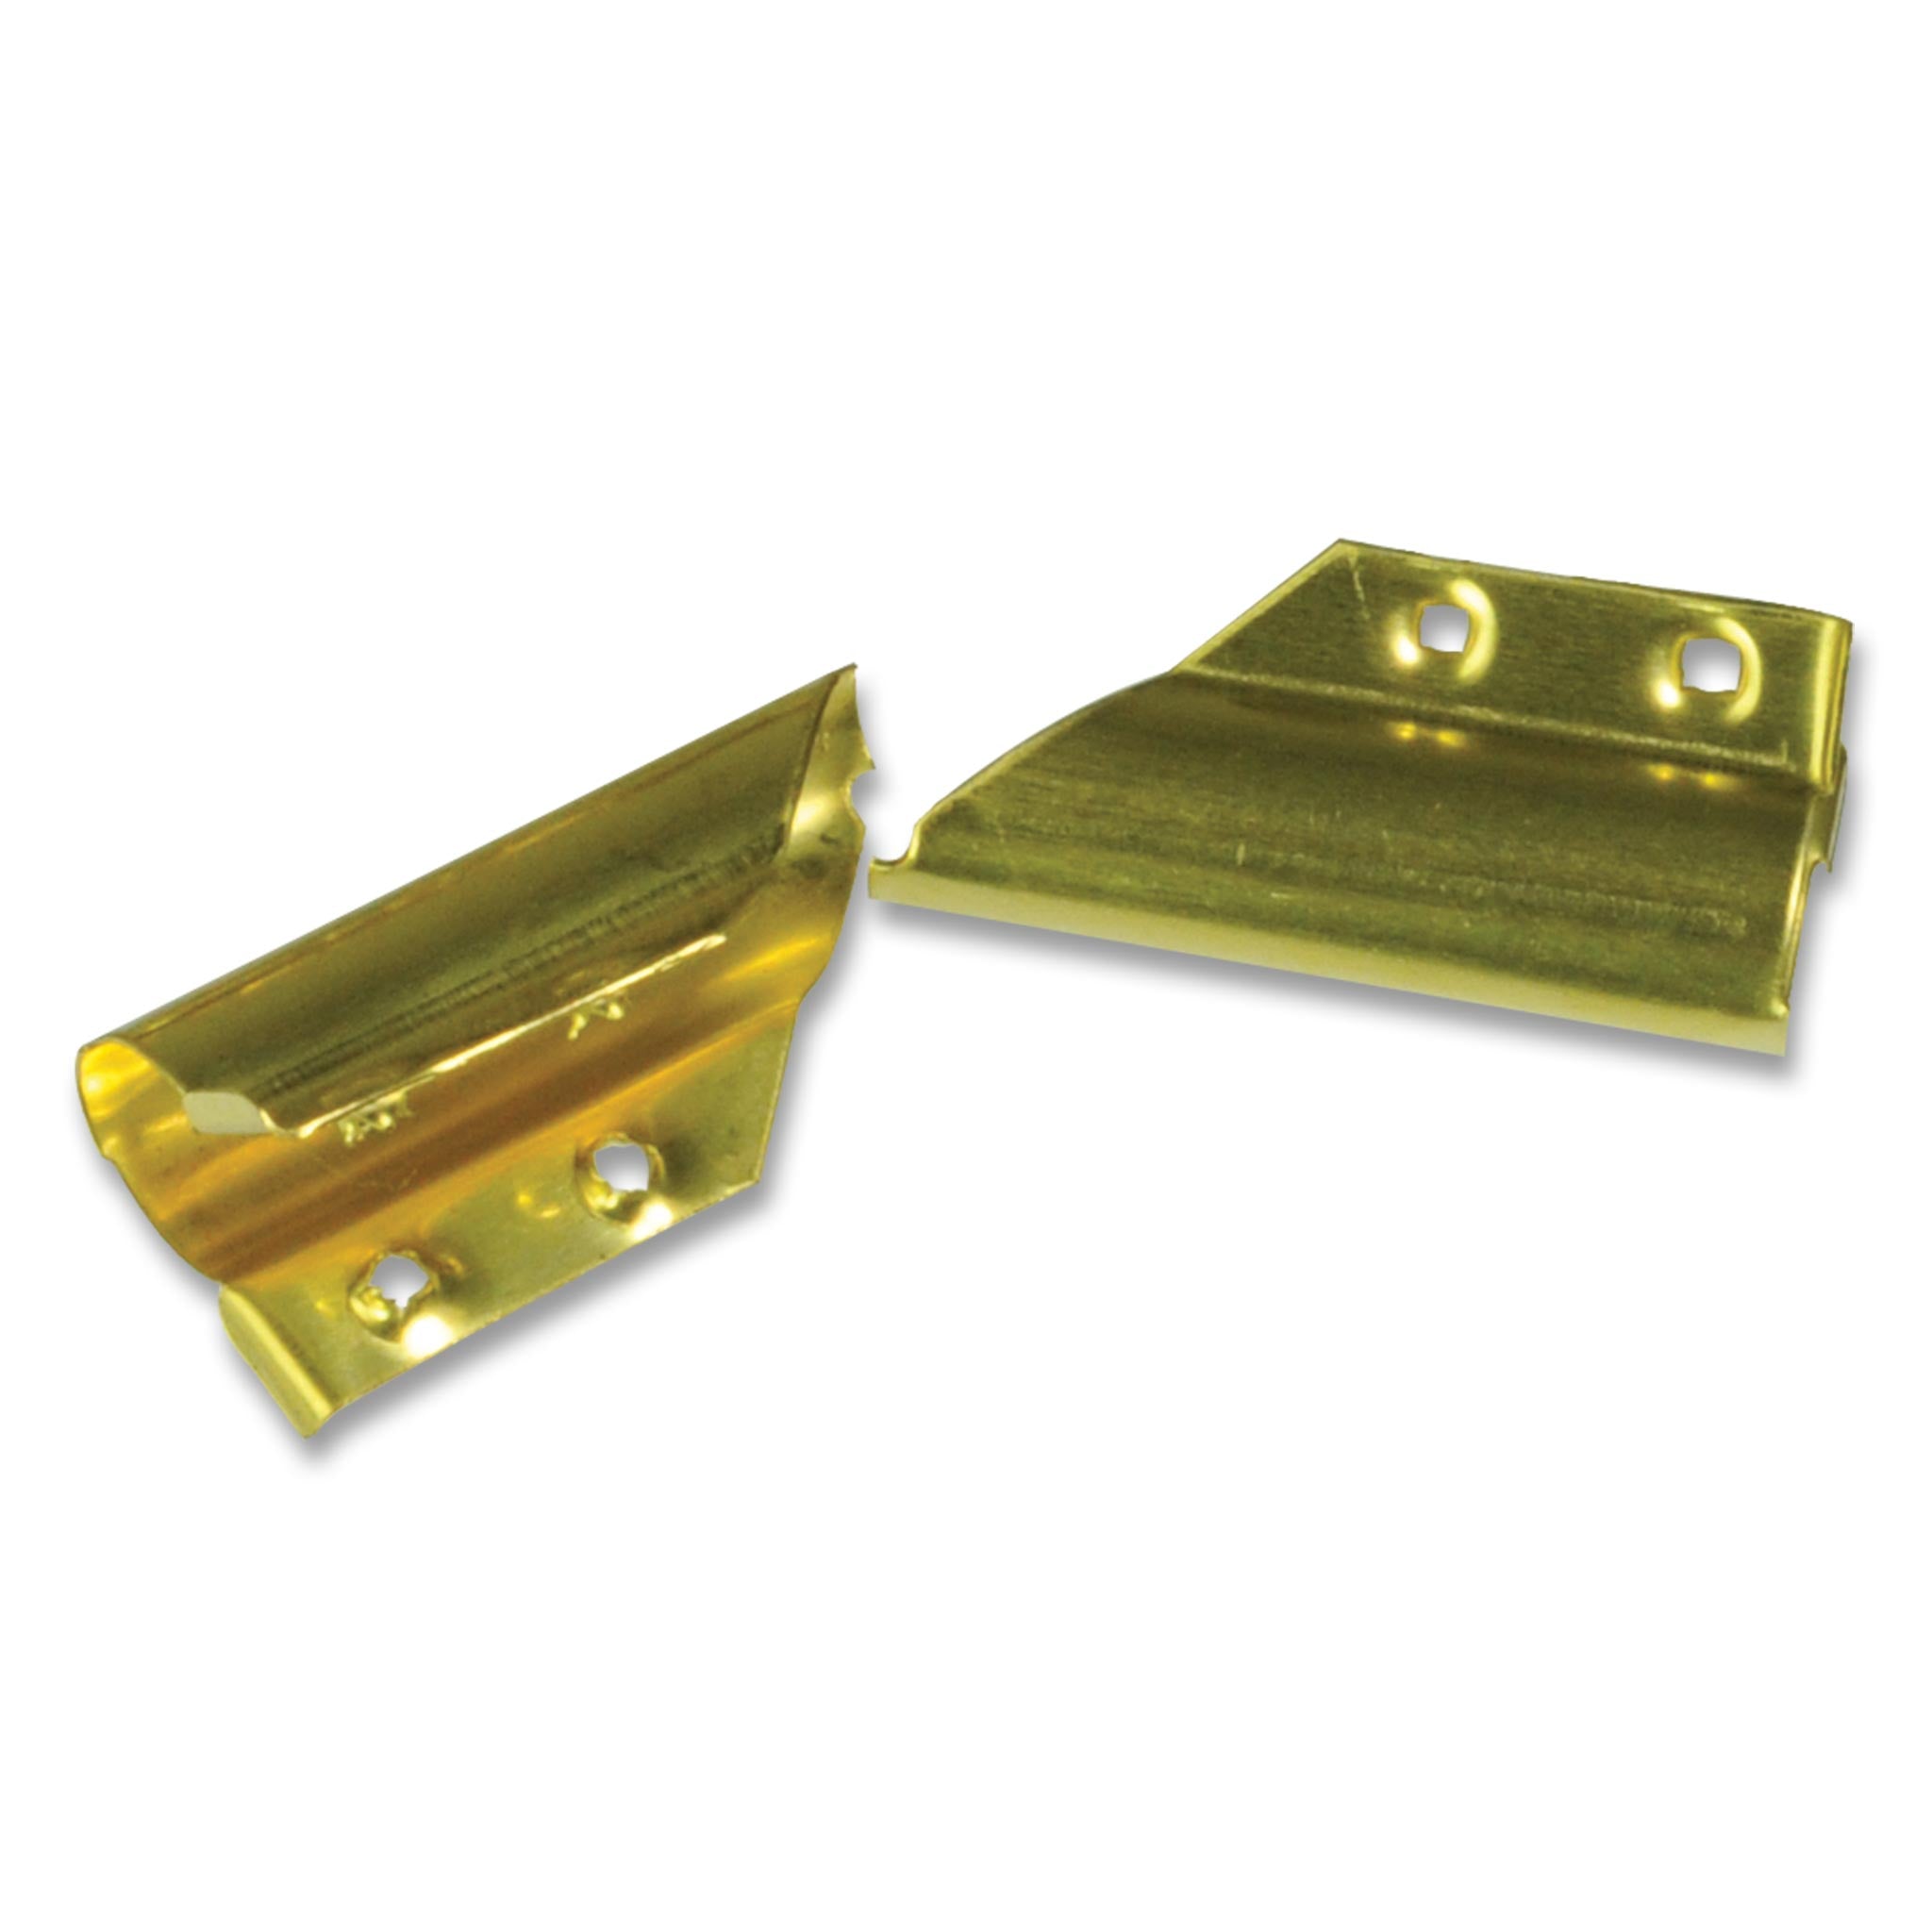 Brass End Clips for Squeegee Channels